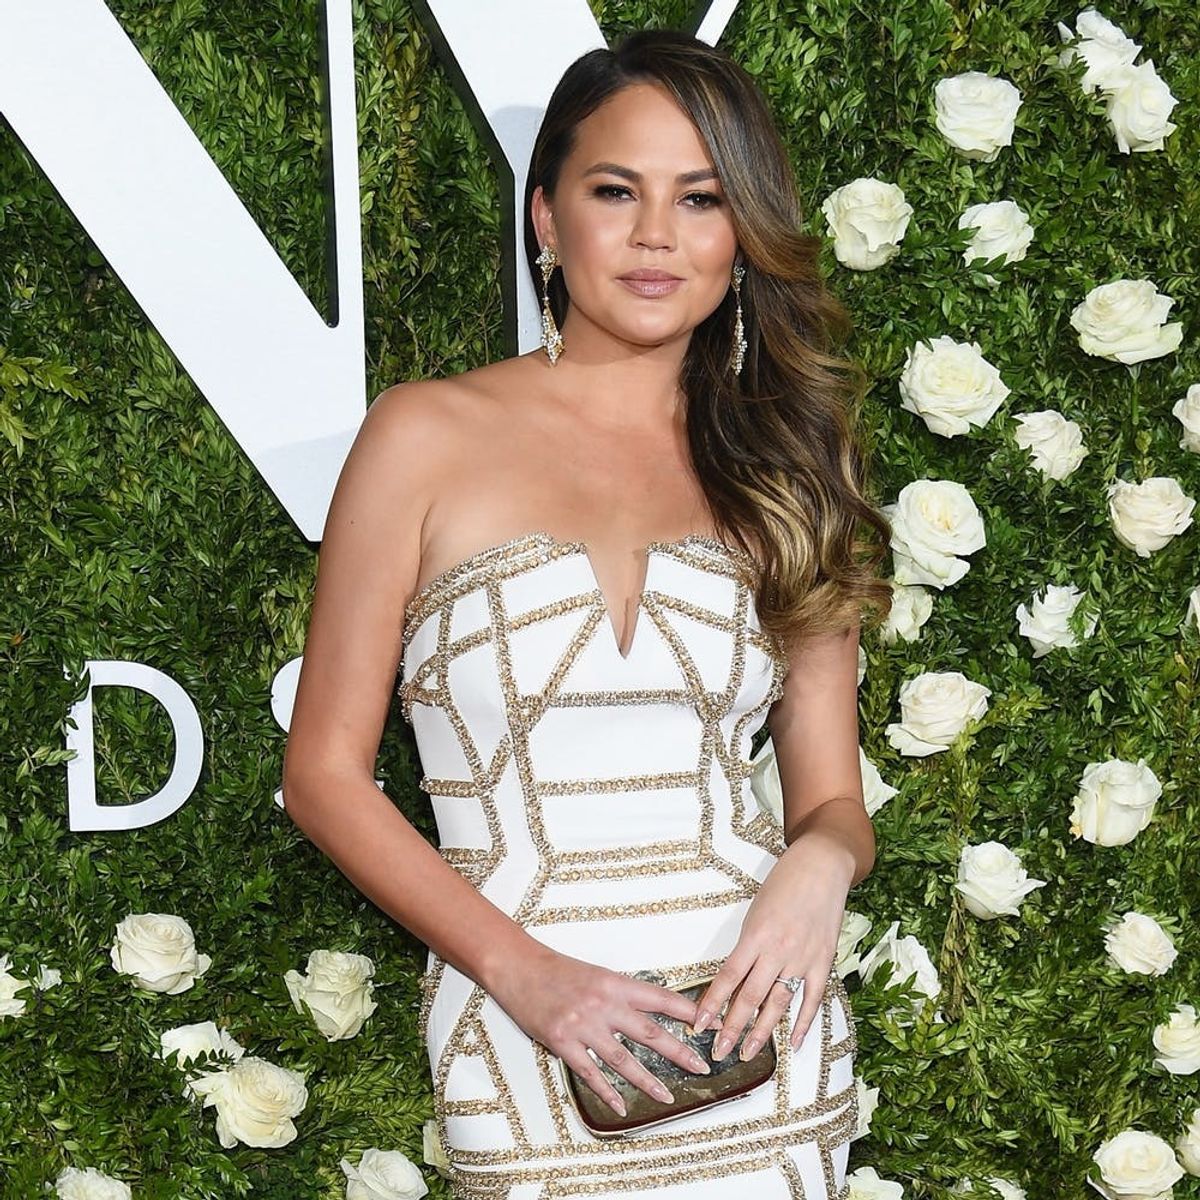 This Time-Lapse Video of Chrissy Teigen’s Makeup Routine Is Mesmerizing